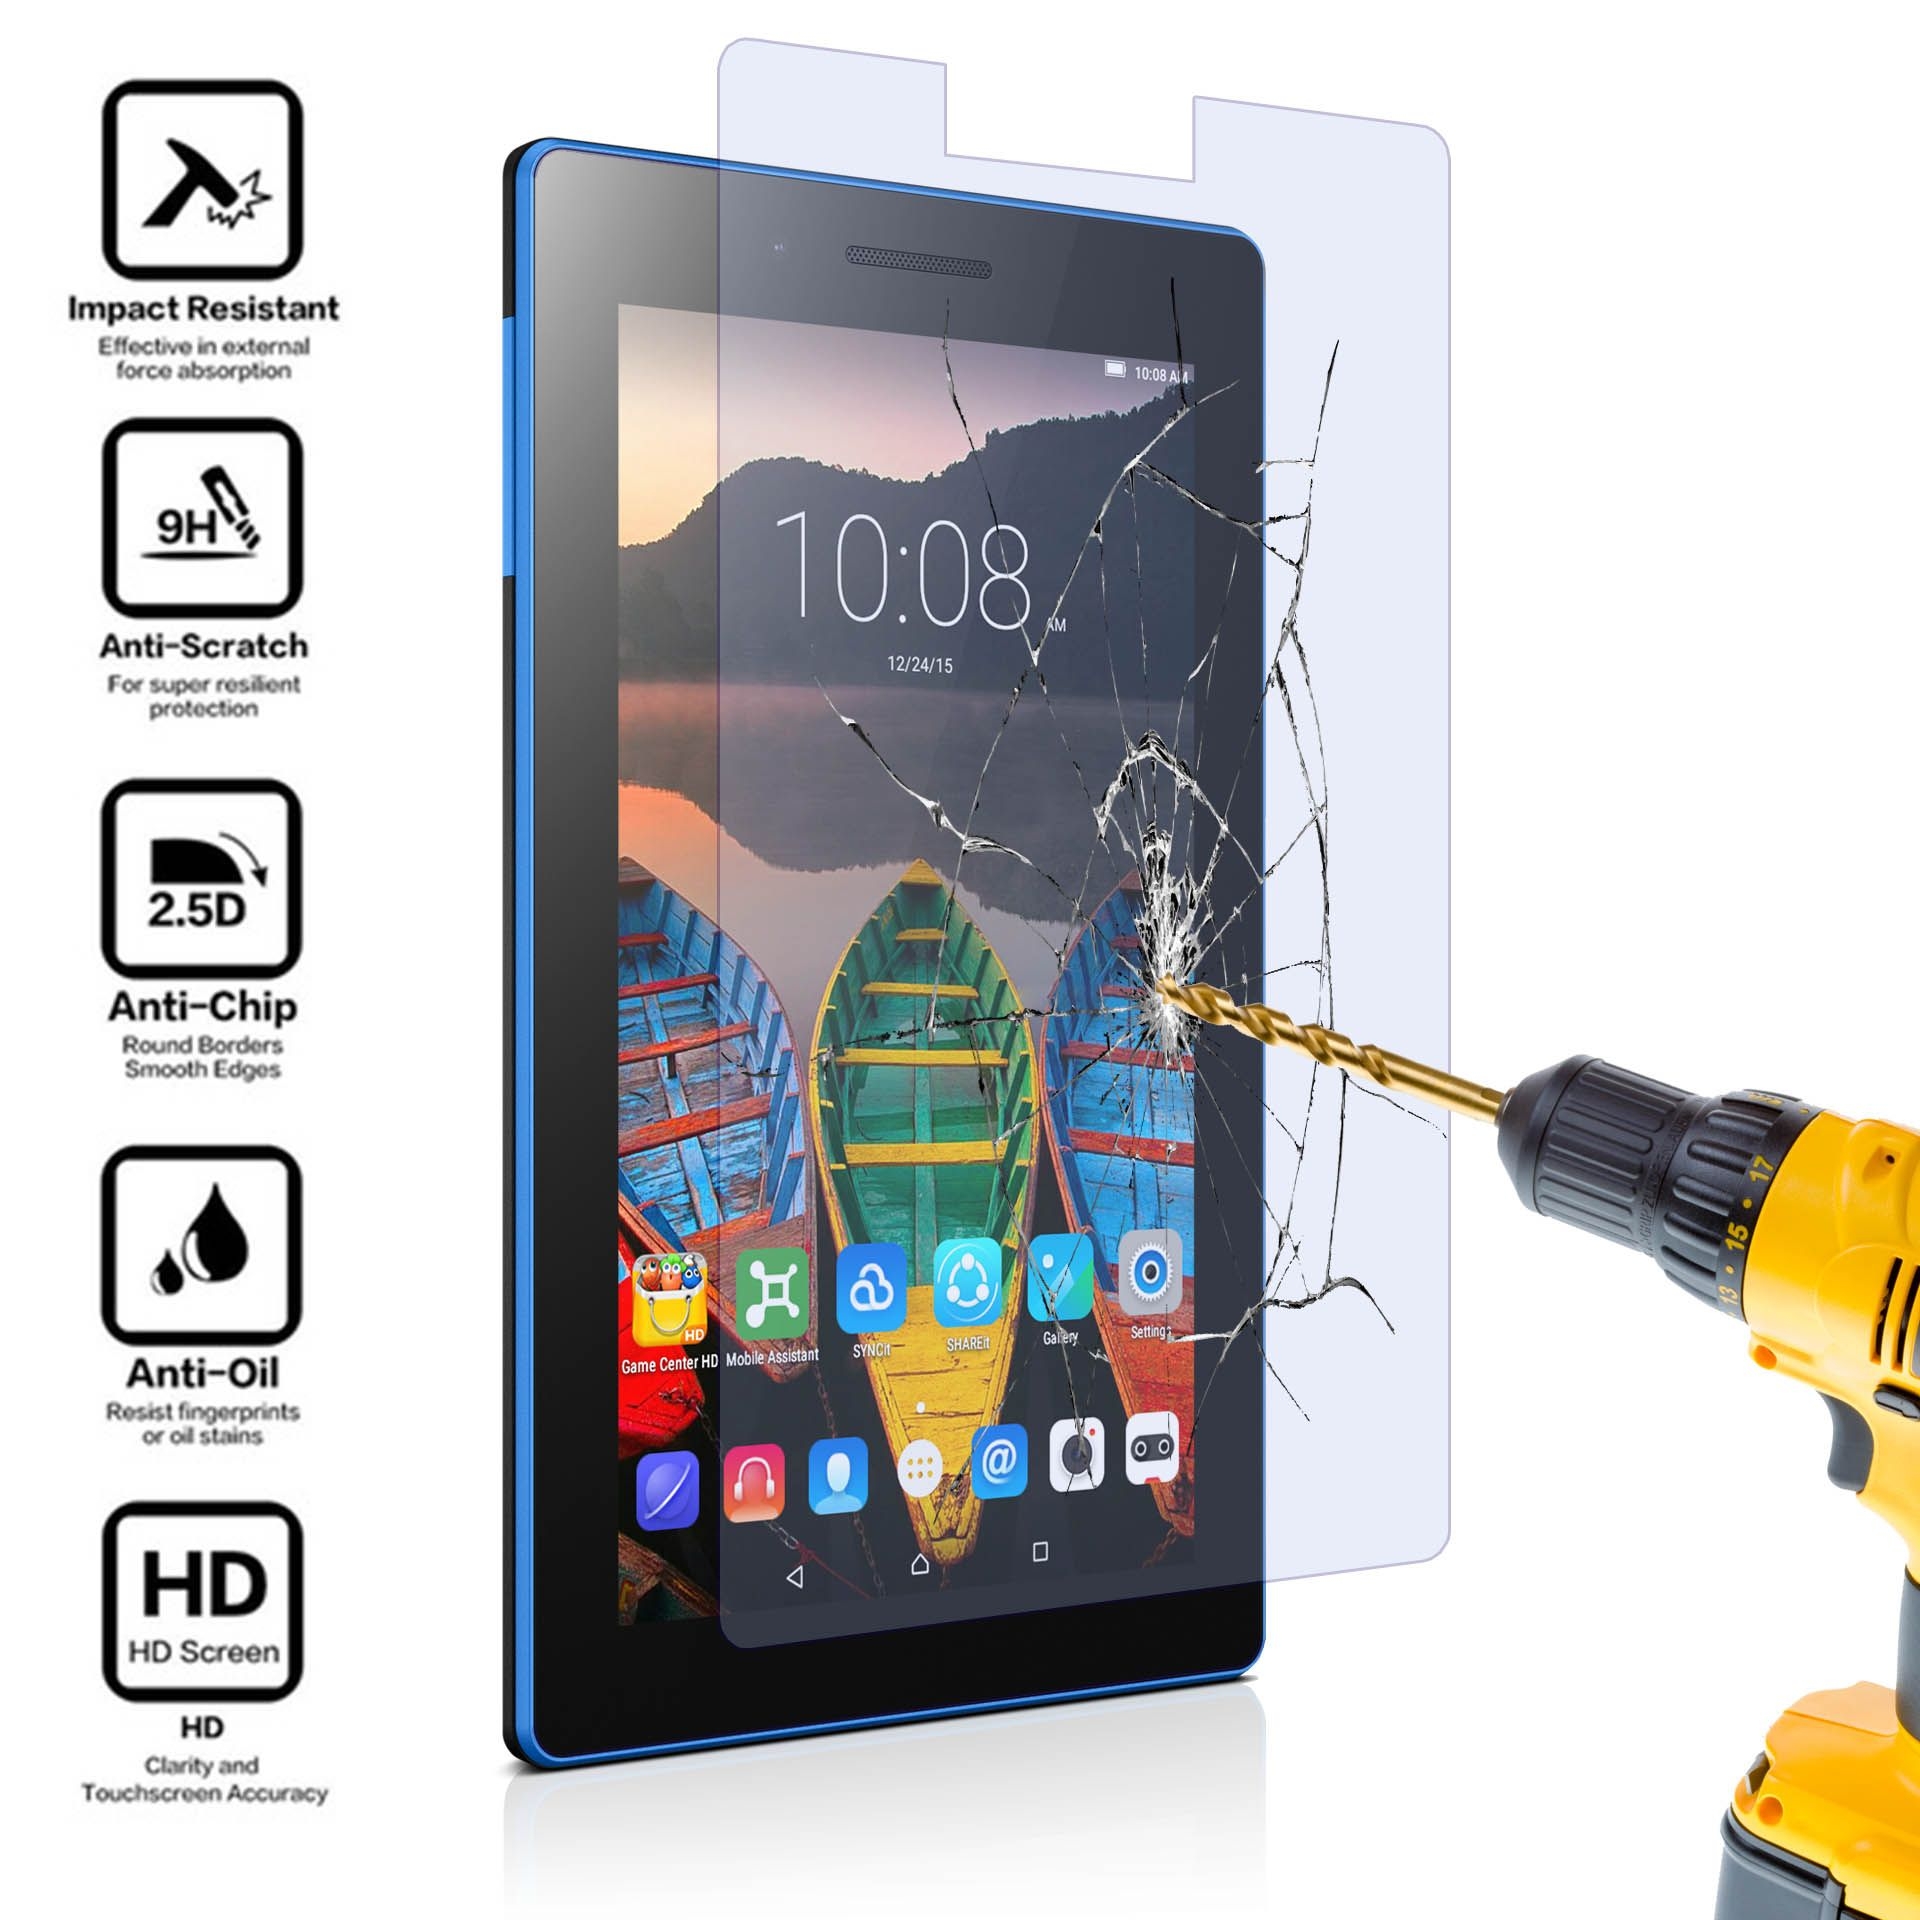 Tempered glass screen protector for tablets – Samsung Tab A 8.0 T387